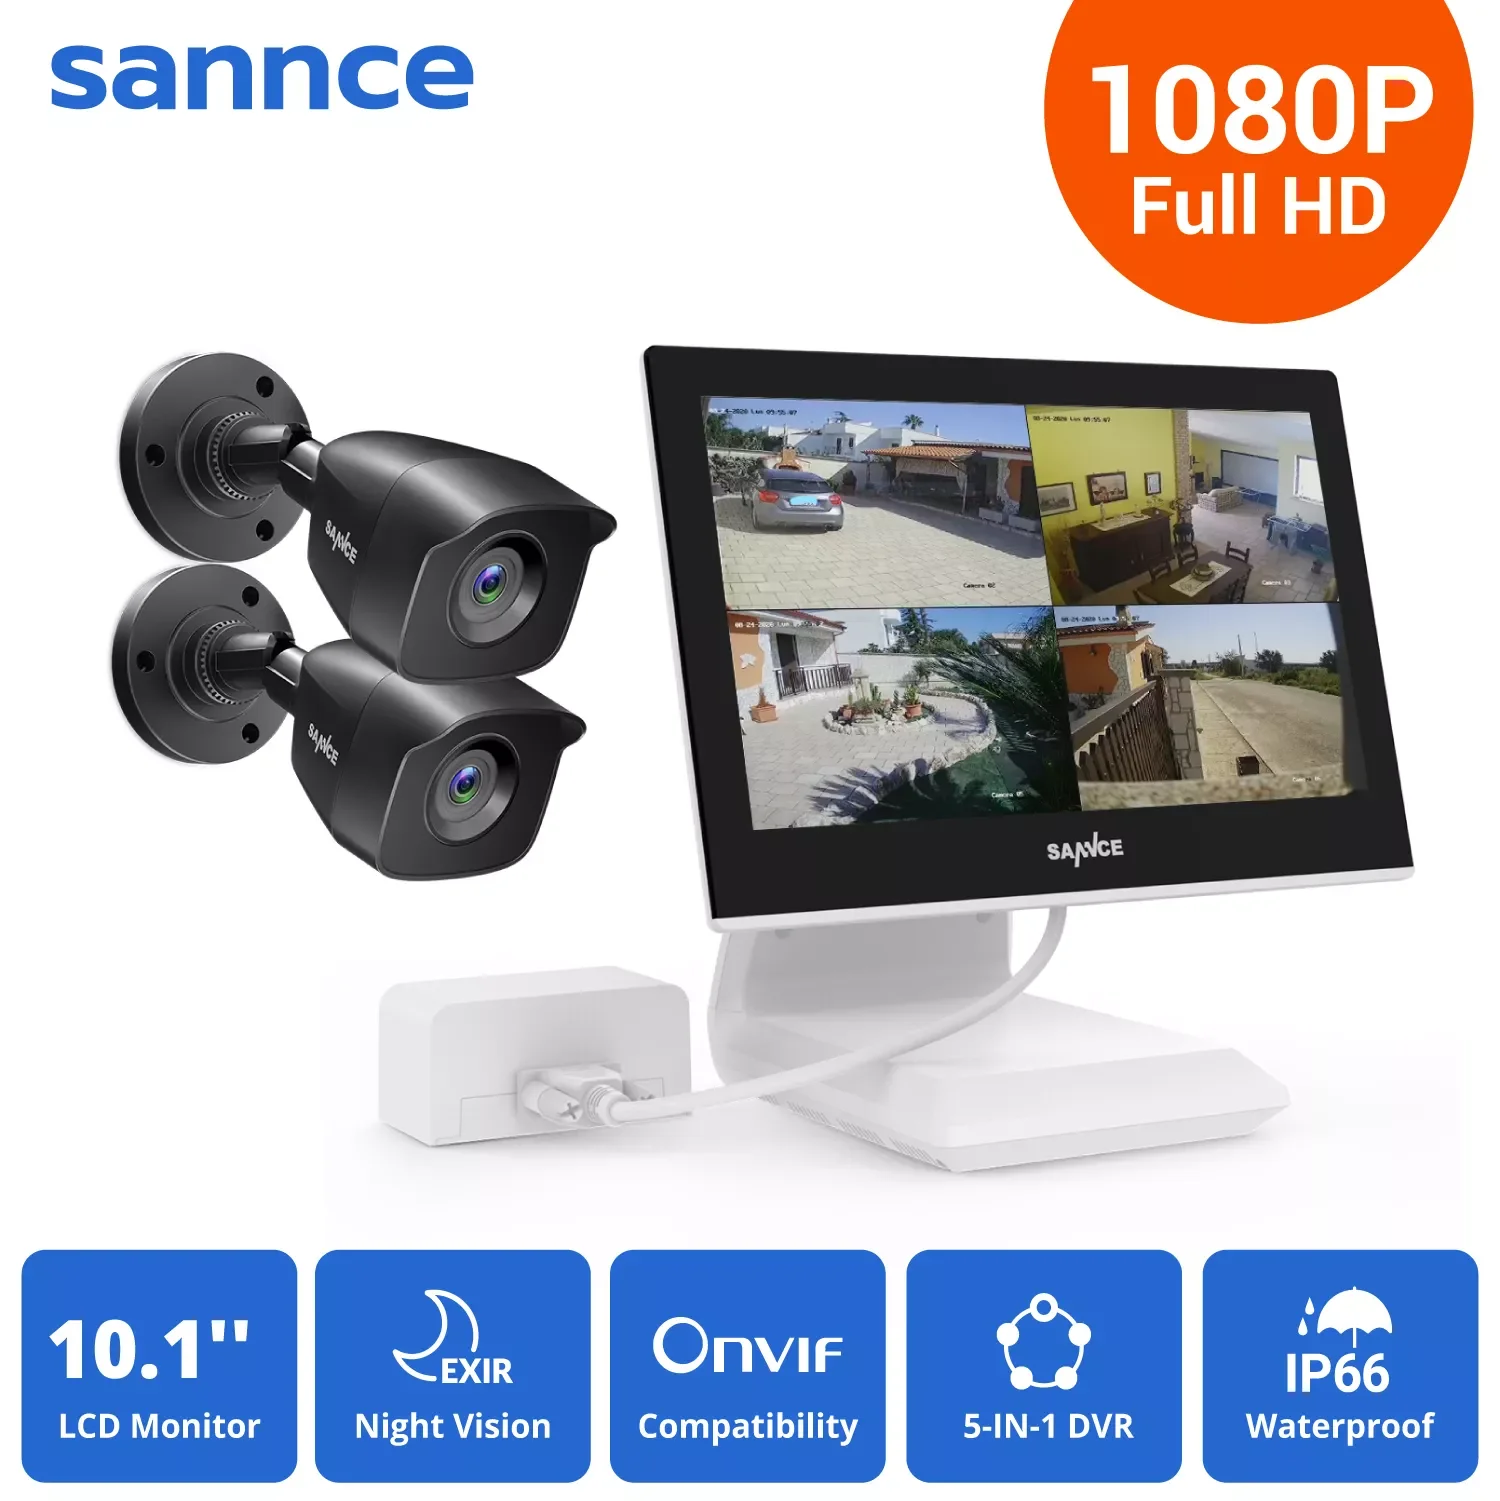 

SANNCE 10"1 LCD Monitor 5in1 4CH DVR with 2PCS 1080P CCTV IP66 Waterproof Indoor Outdoor Security Bullet Camera System